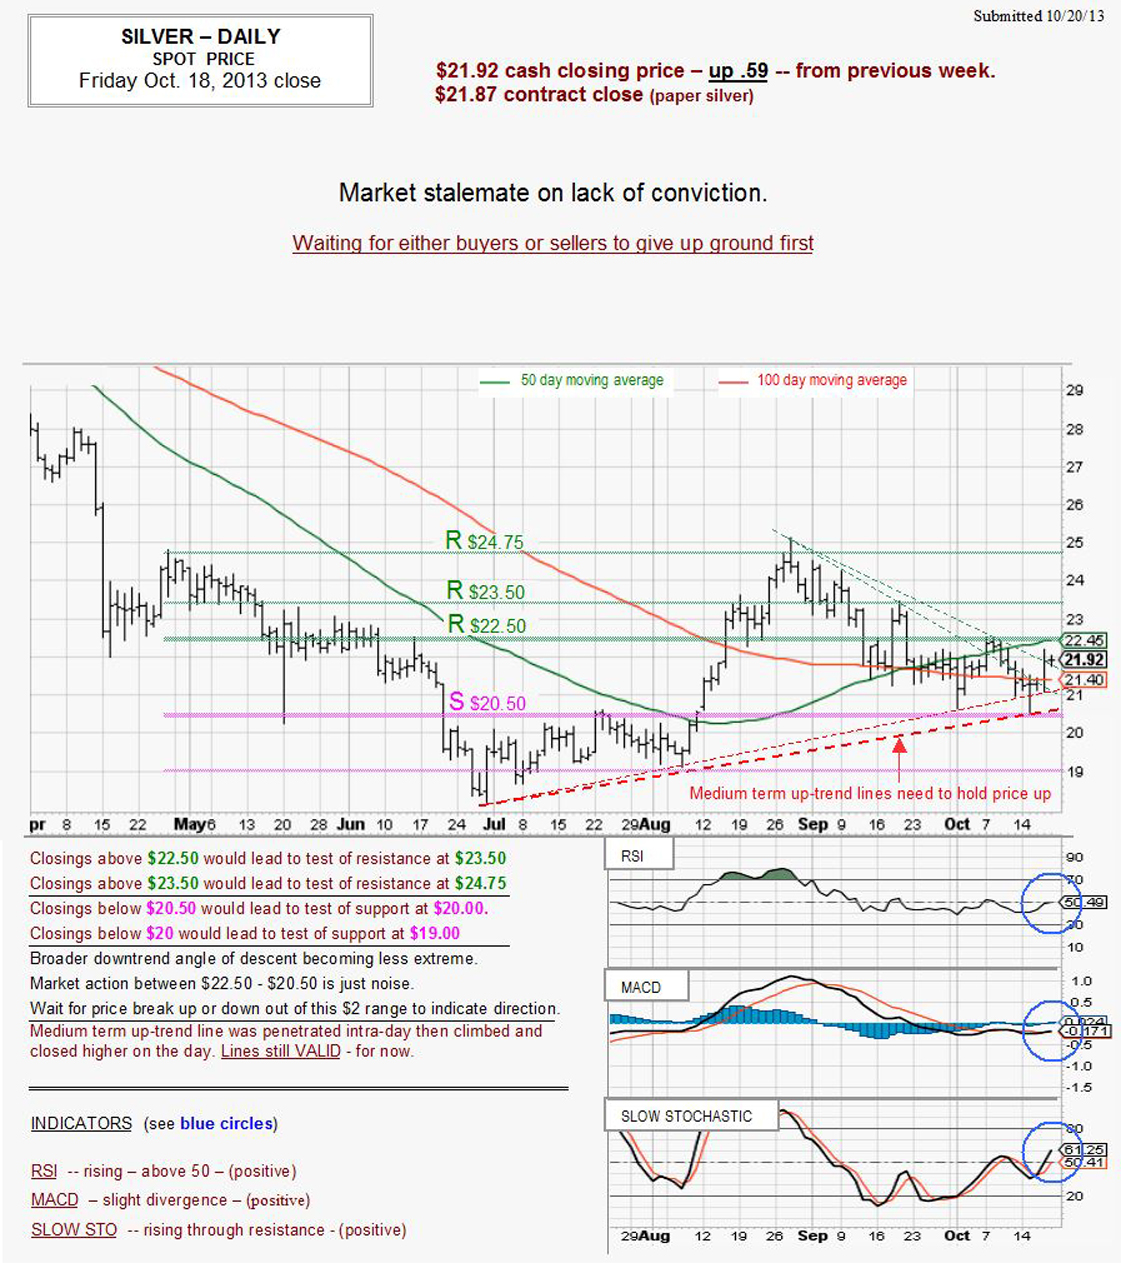 Oct 18, 2013 chart & commentary